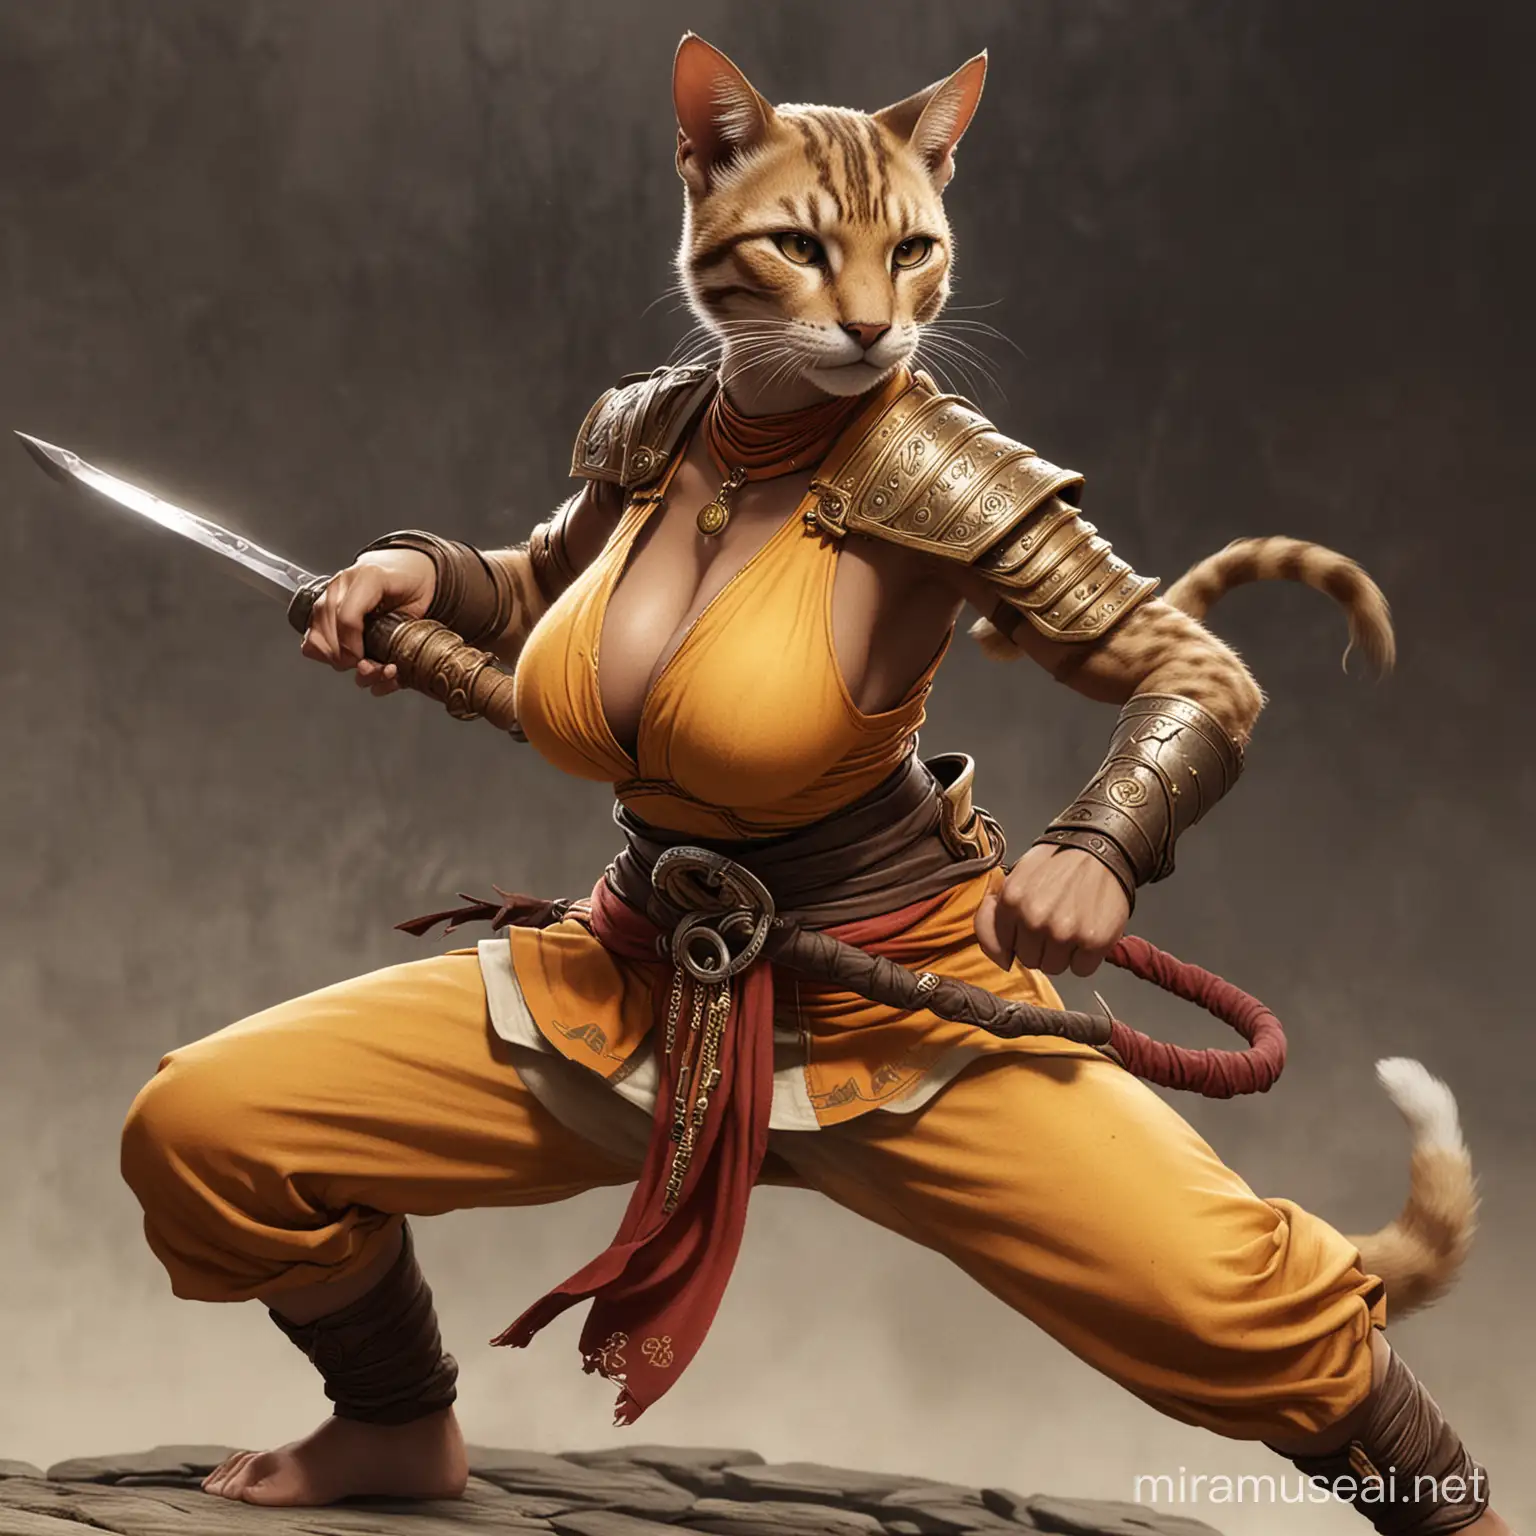 Powerful Busty Female Tabaxi Monk Fighter in Dynamic Combat Stance